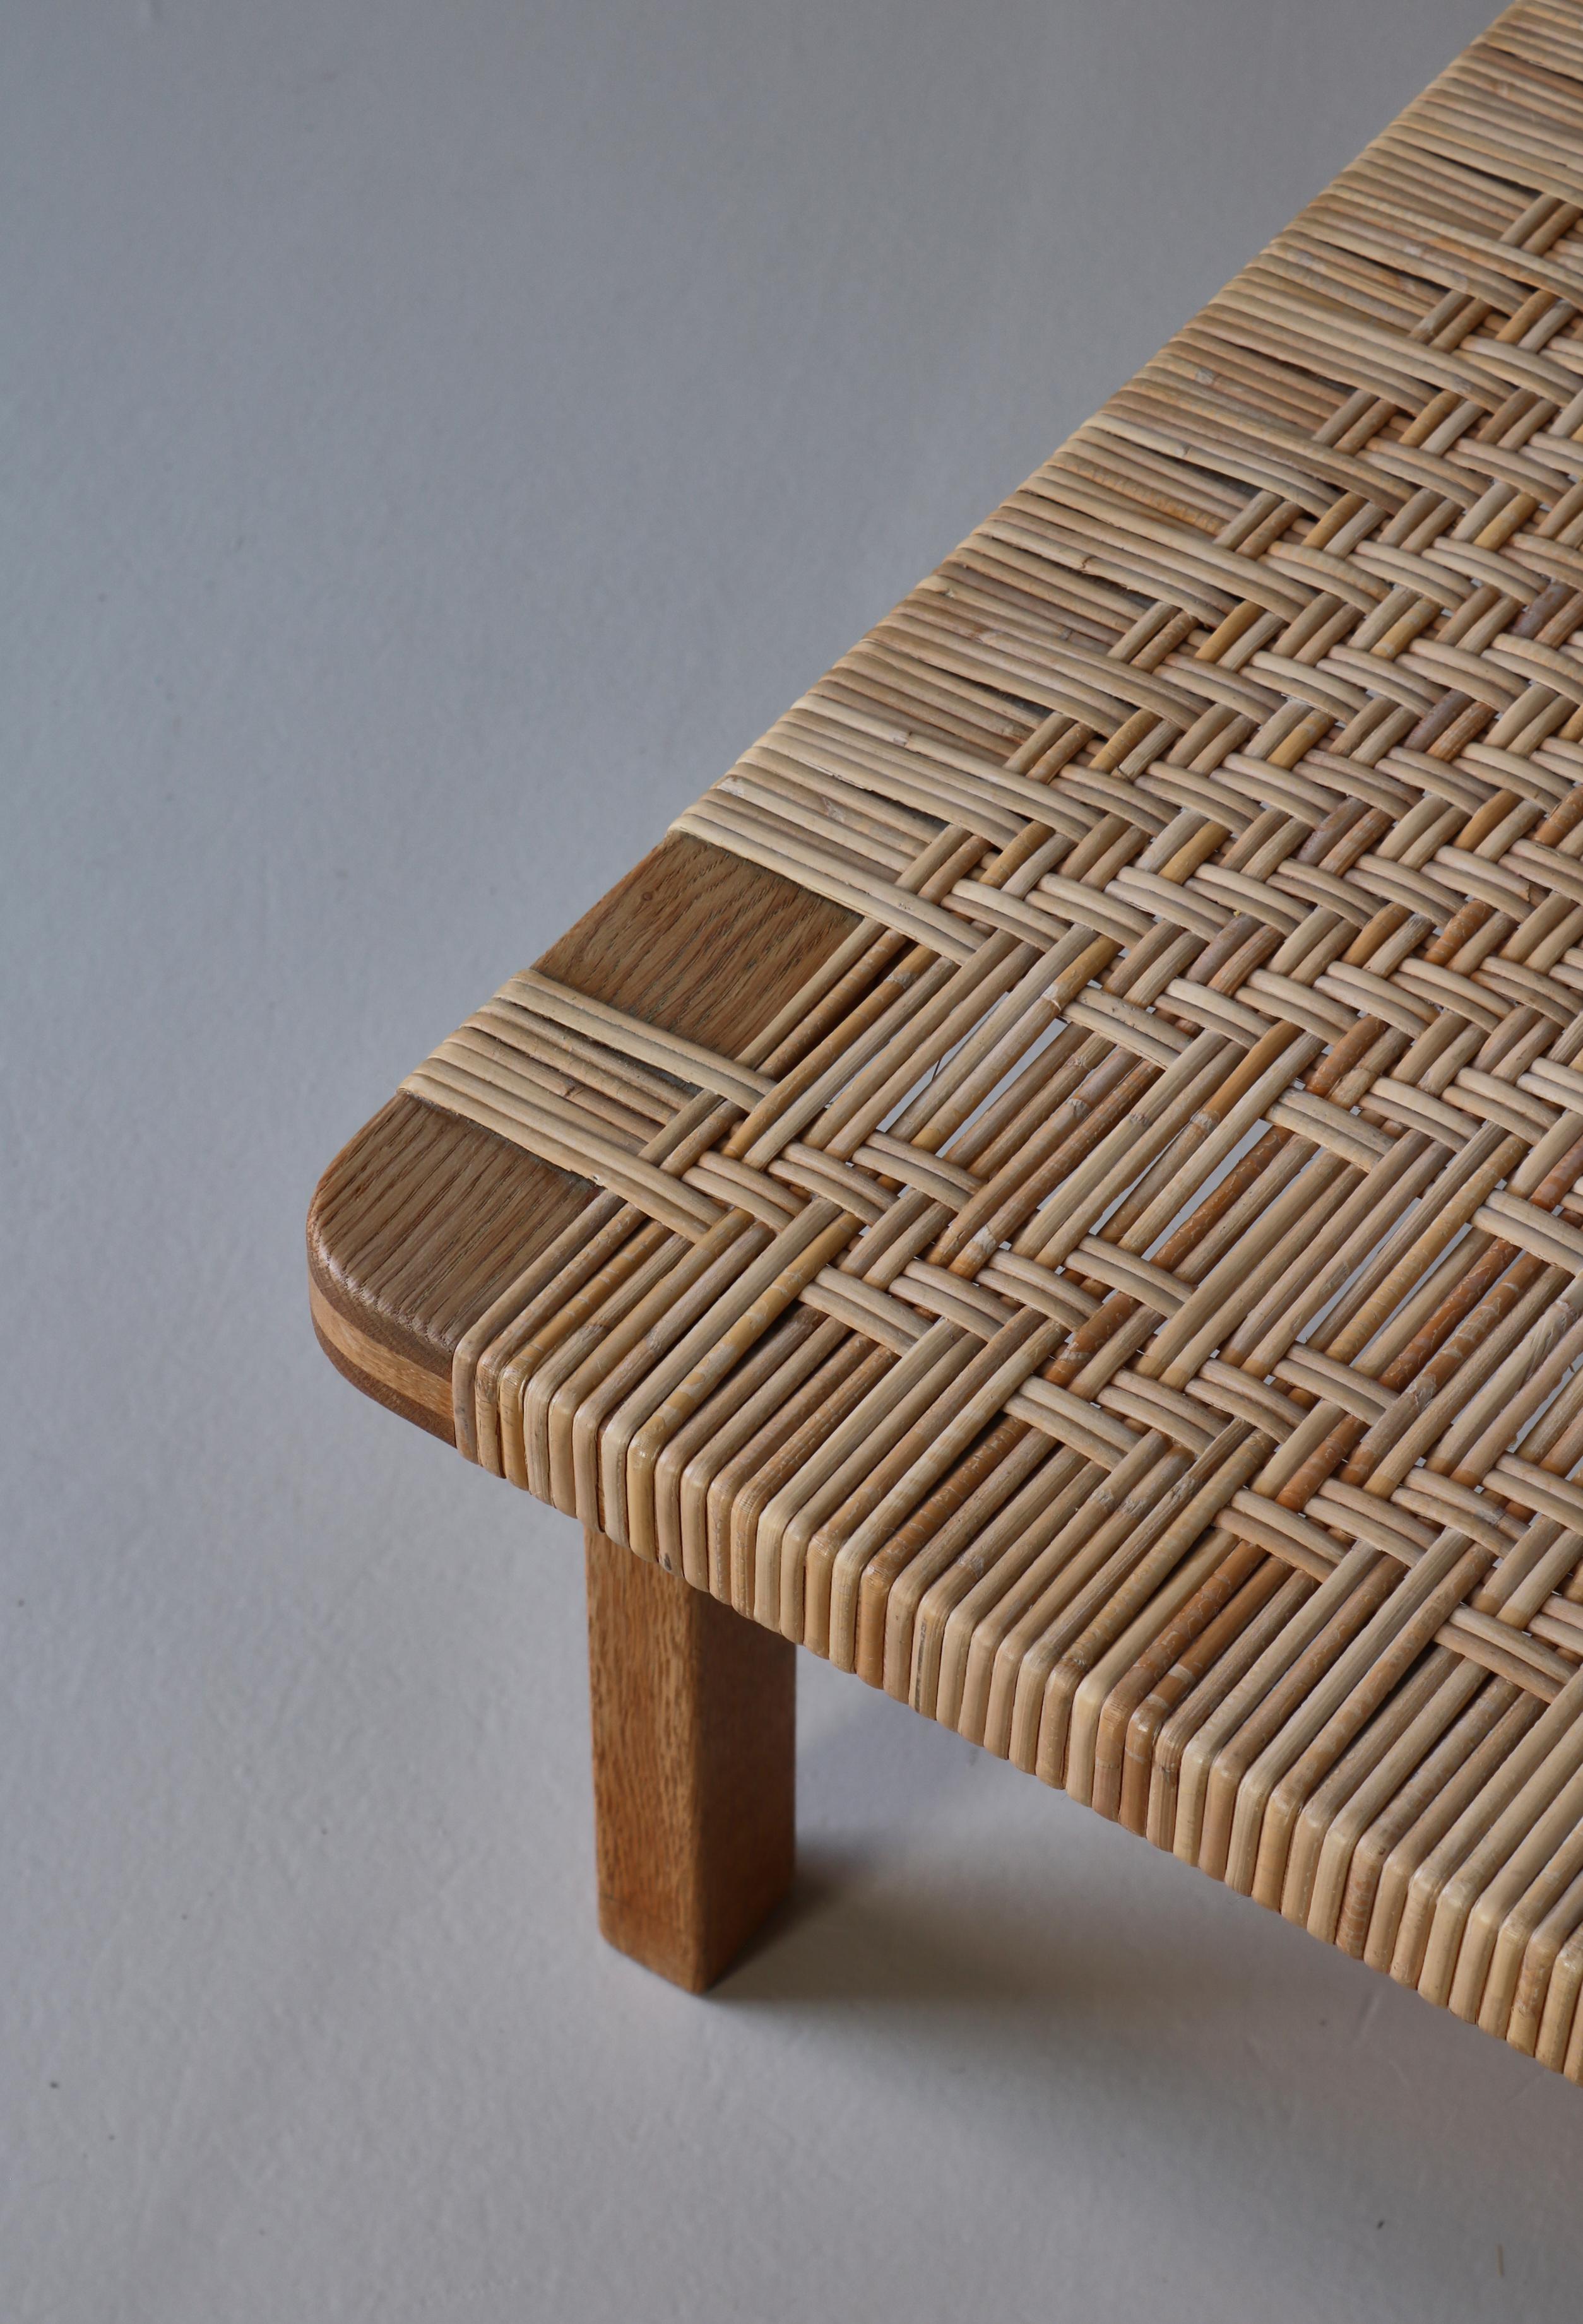 Borge Mogensen Large Side Table or Bench in Oak and Rattan Cane, 1960s, Denmark For Sale 8